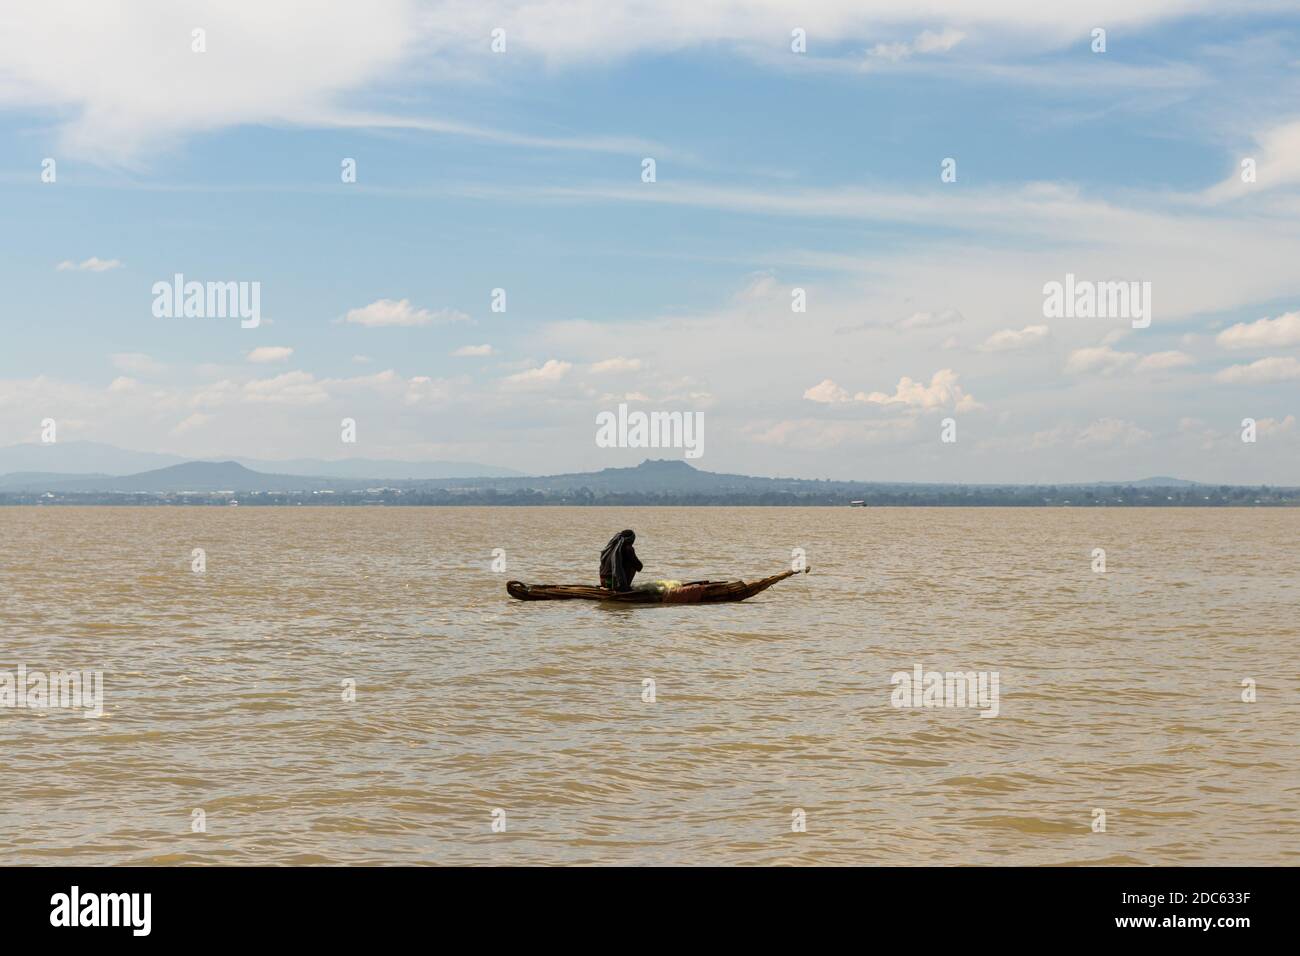 African fisherman in papyrus boat/wooden boat on lake tana in Ethiopia Stock Photo